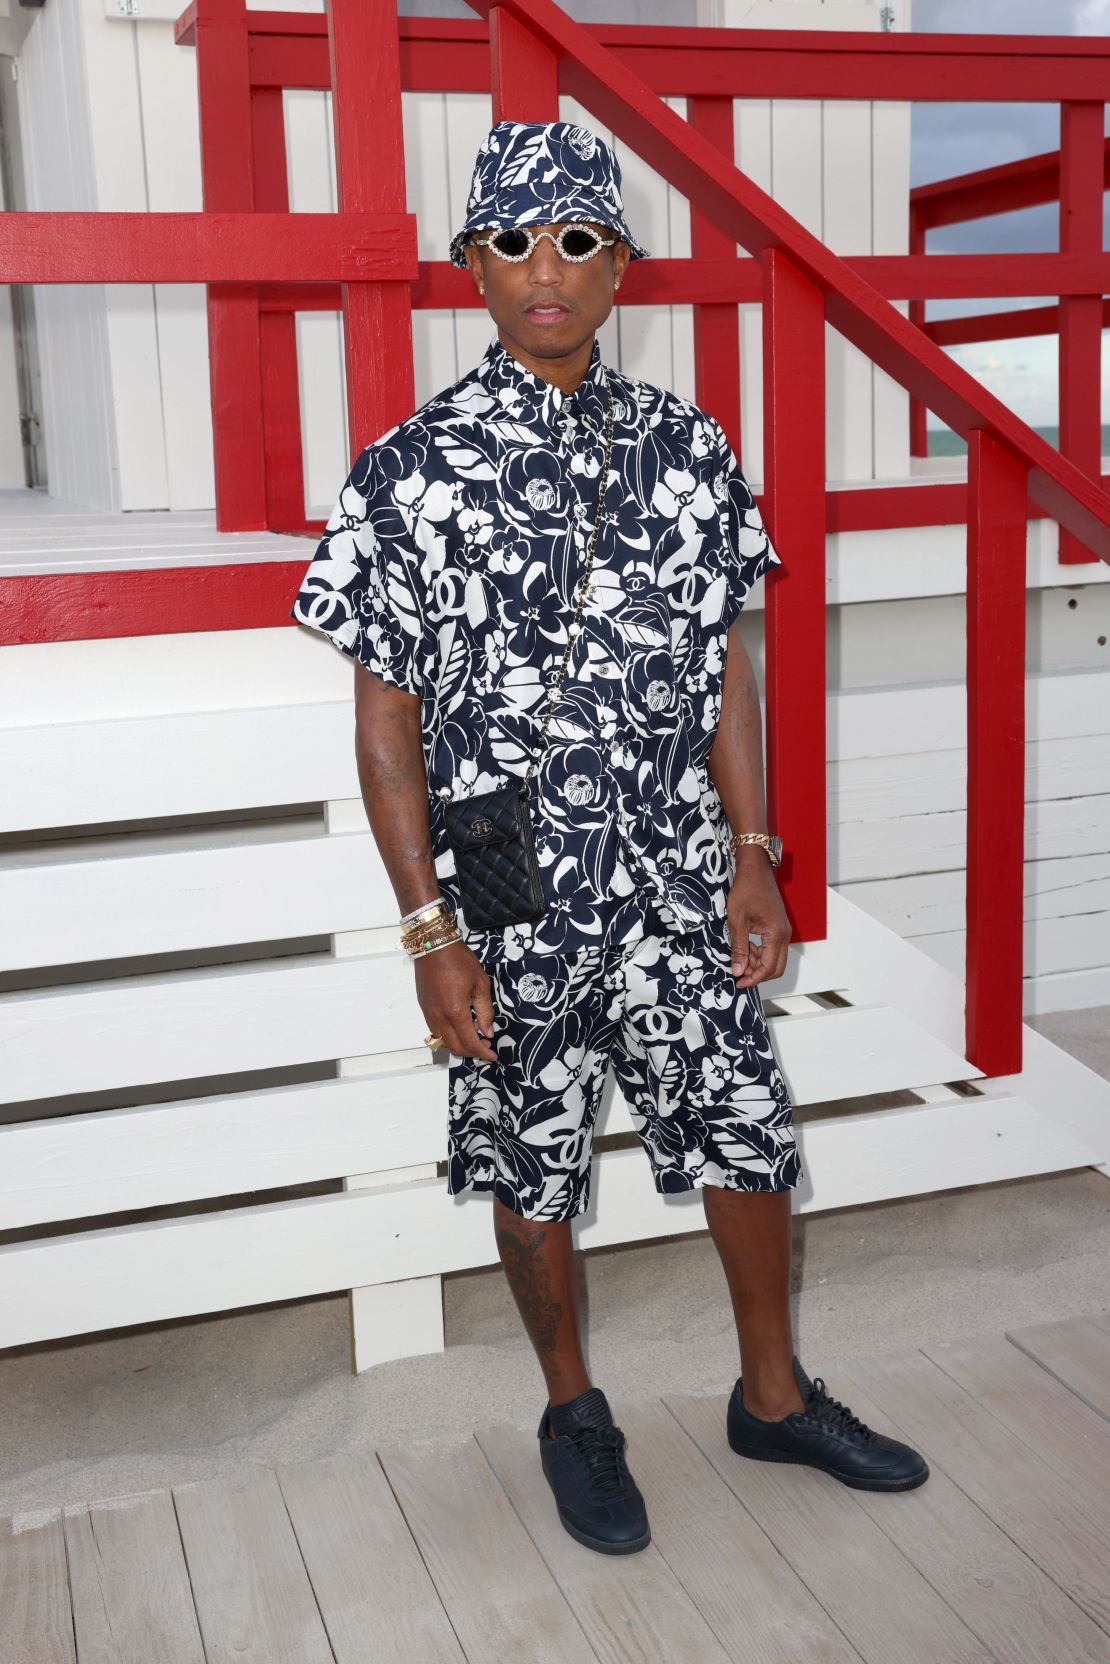 Chanel Cruise 2022 in Miami: Best Dressed Celebs